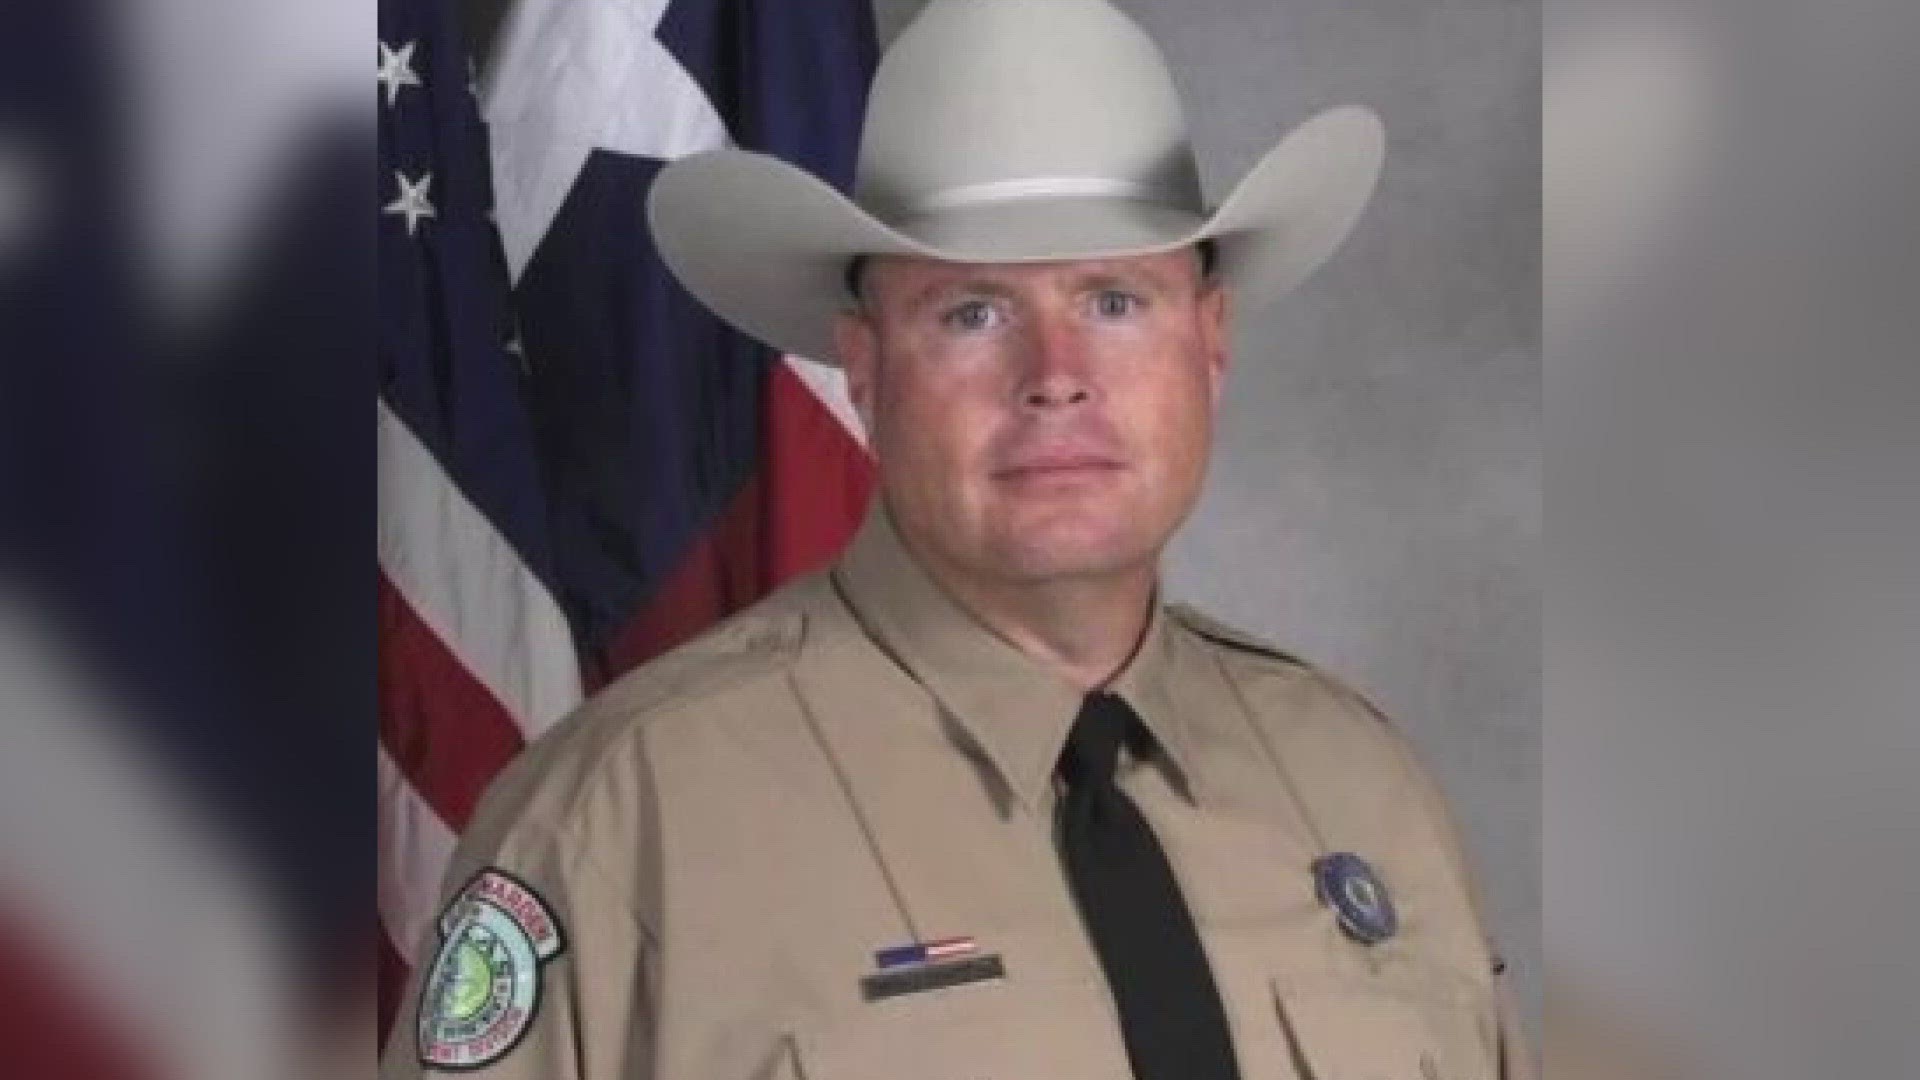 Deputy David Bosecker, who served in Eastland County and Cisco, was shot and killed. The suspect is charged with capital murder of a peace officer.